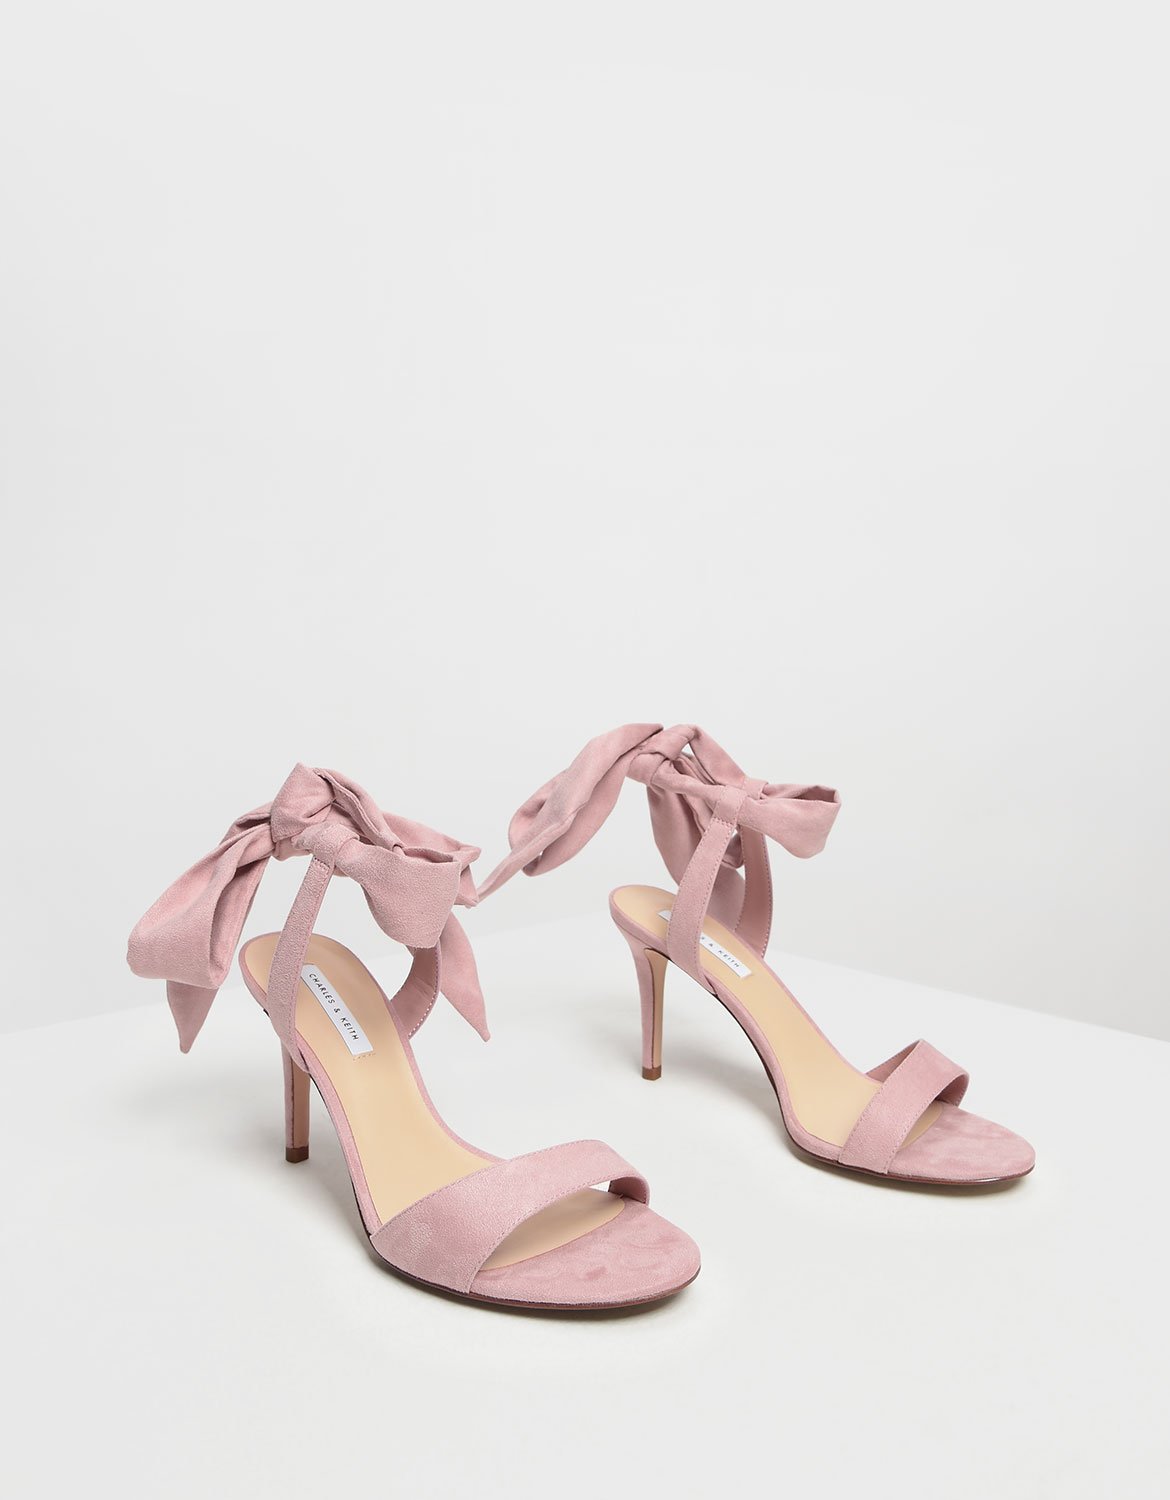 Women's Tie Back Bow Heels in blush - CHARLES & KEITH